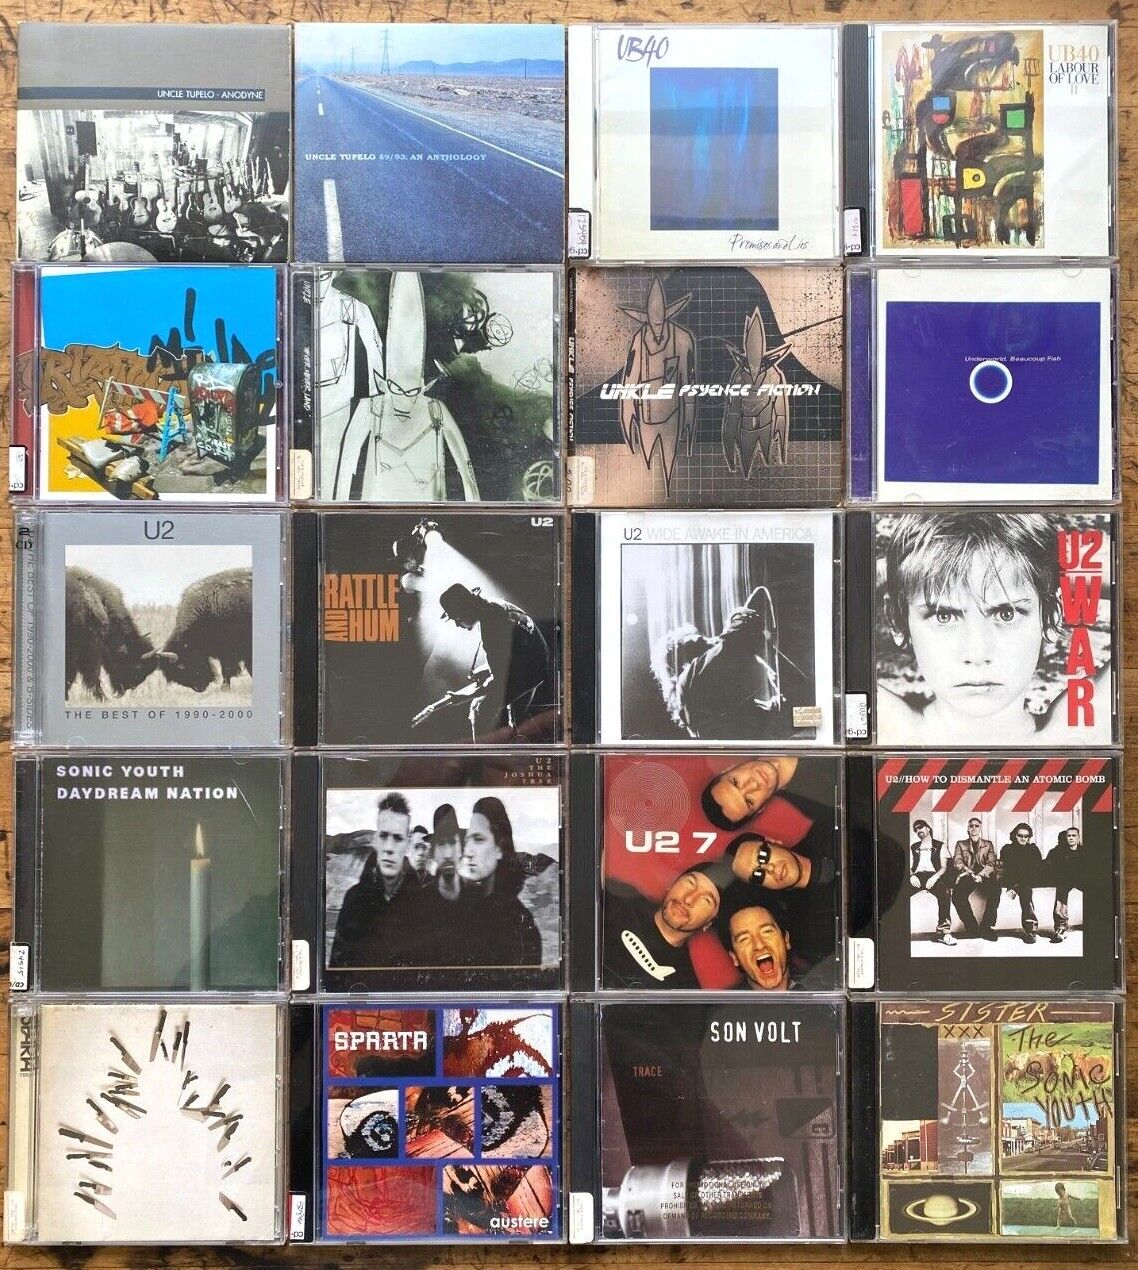 Make Your Own CD Bundle: Radiohead, Arcade Fire, Soul Coughing, Supergrass, U2 &